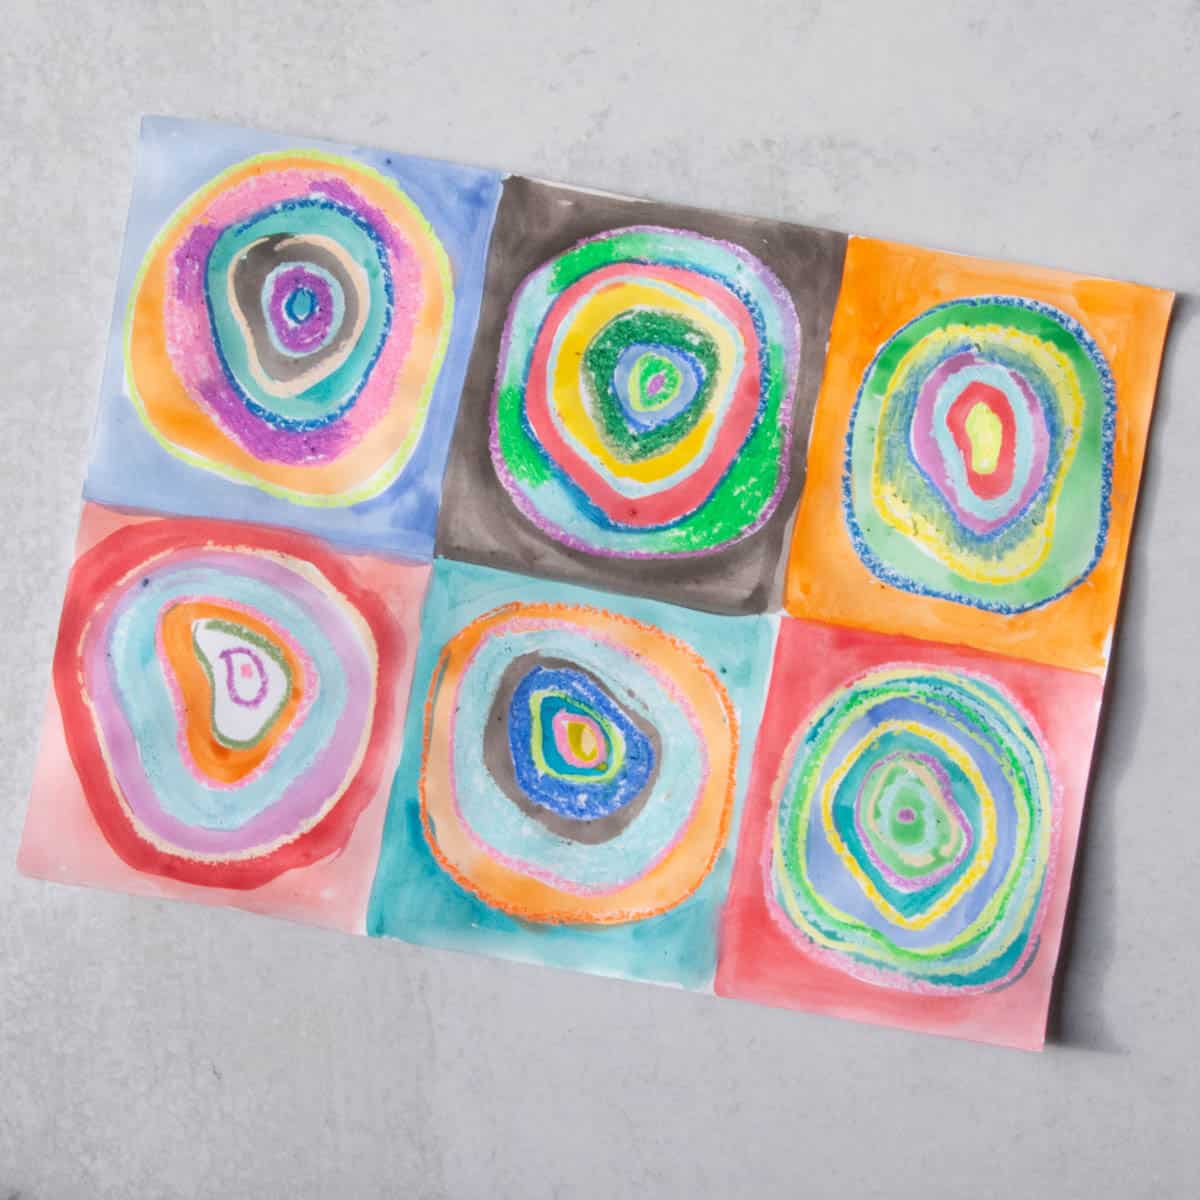 Fun Kandinsky Concentric Circles Art Lesson For Kids